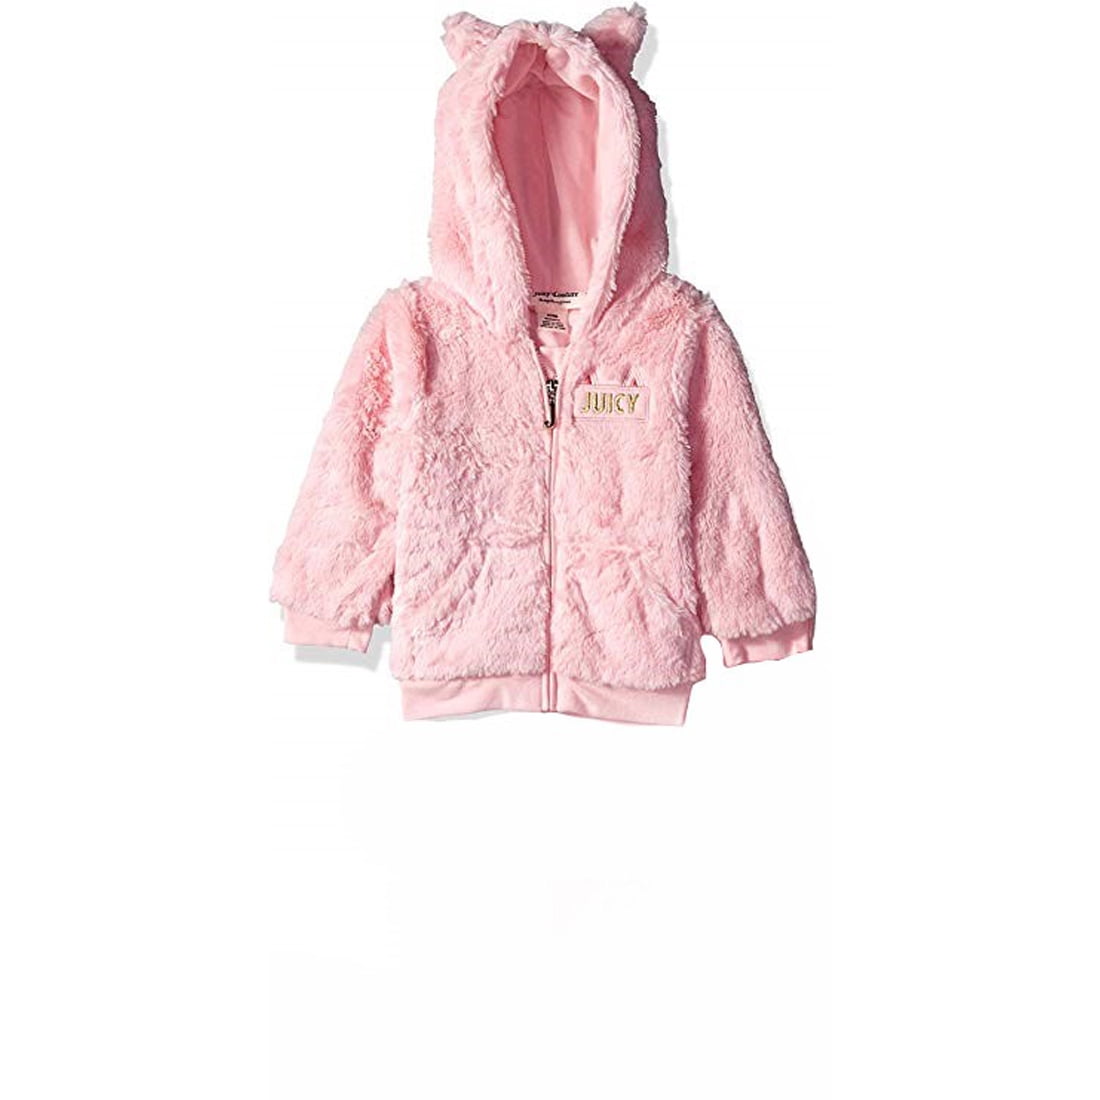 Laminated Bubble Kids Coat with Fur Hoodie Juicy Couture Girls Puffer Jacket